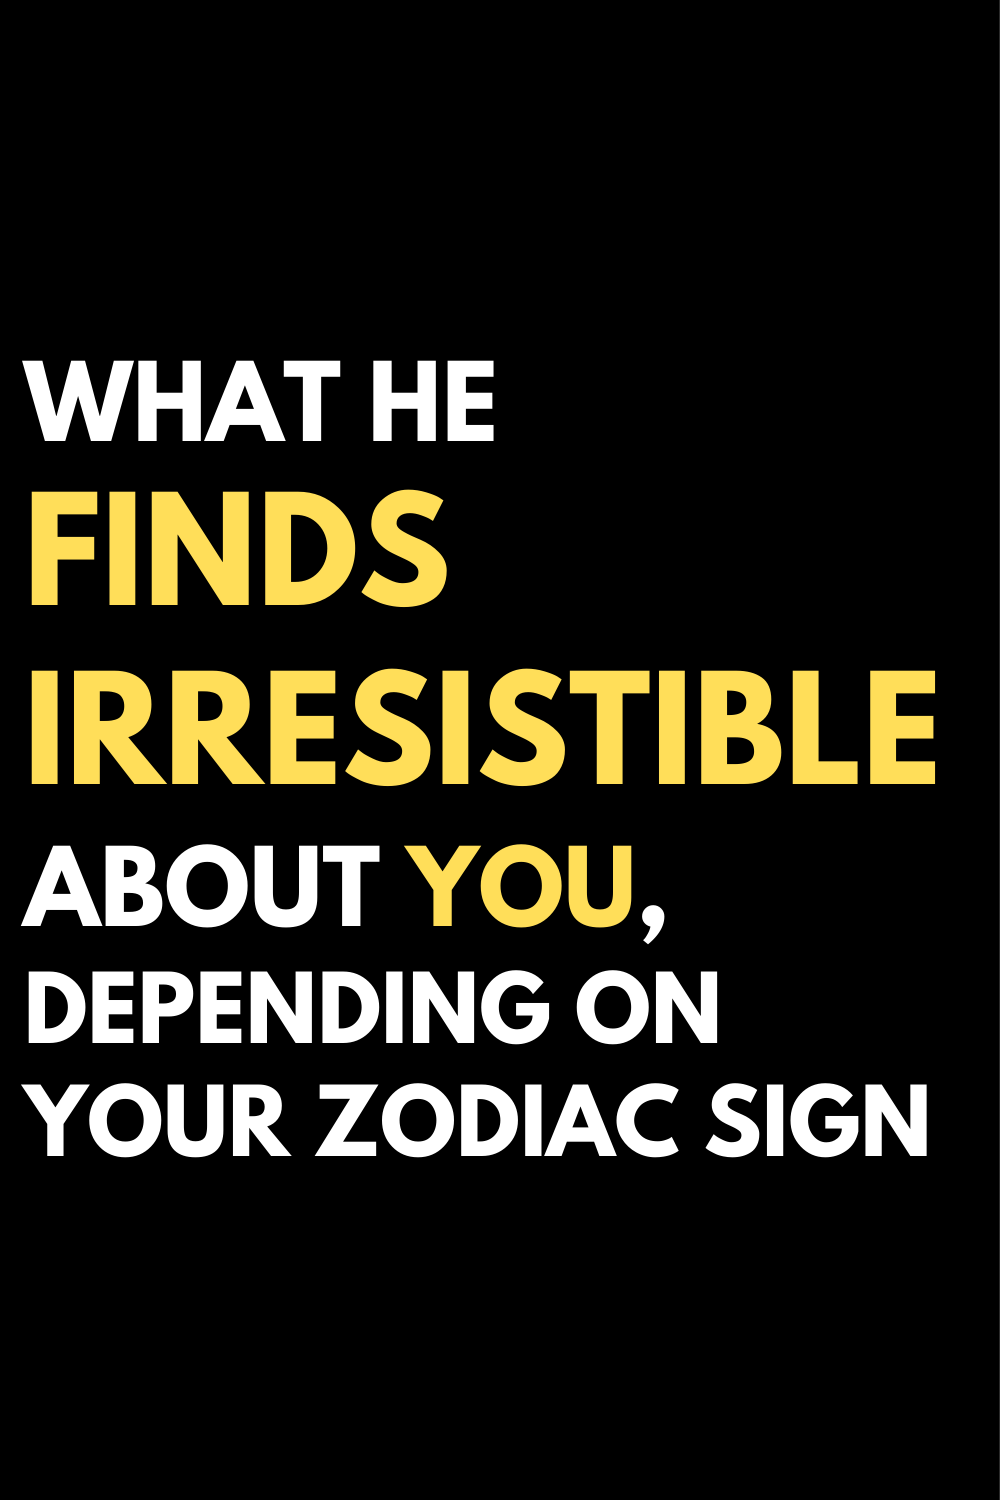 What he finds irresistible about you, depending on your zodiac sign